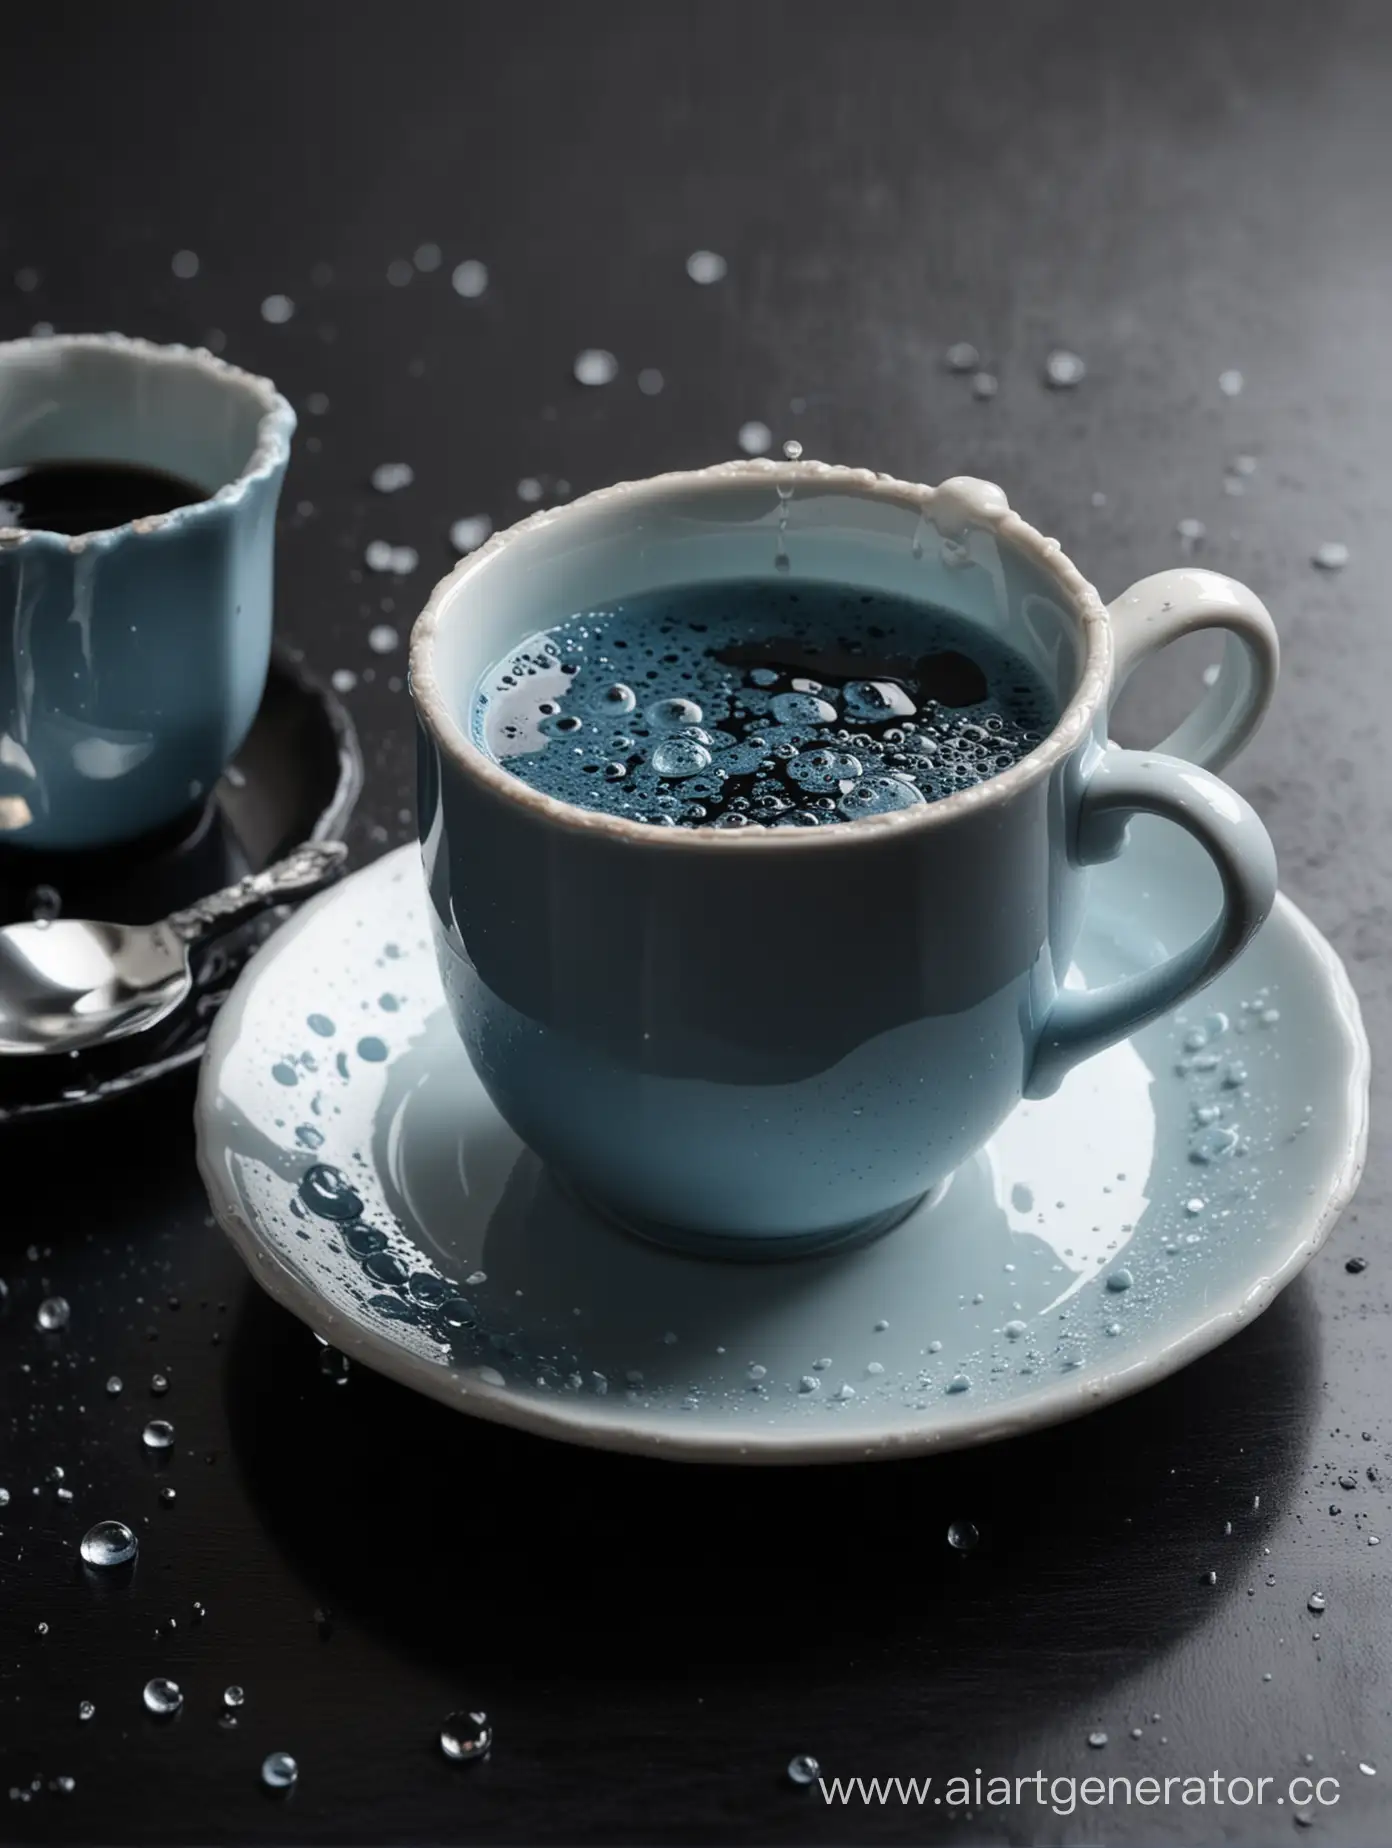 Vintage-Blue-Porcelain-Coffee-Cup-with-Dripping-Black-Coffee-on-Black-Lacquered-Table